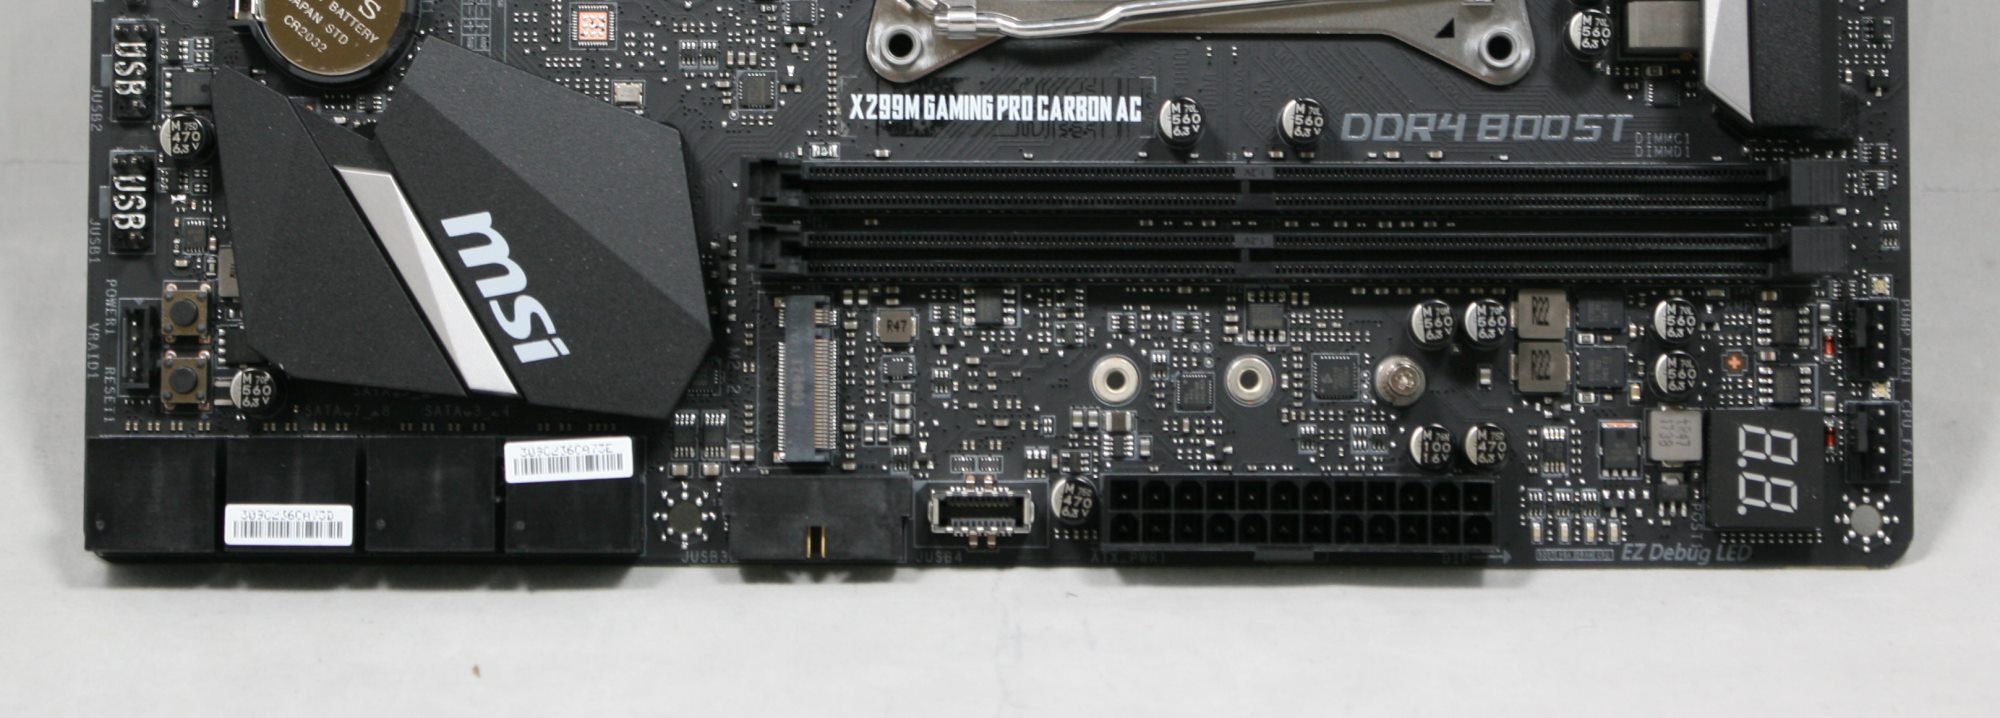 Visual Inspection - The MSI X299M Gaming Pro Carbon AC Motherboard Review